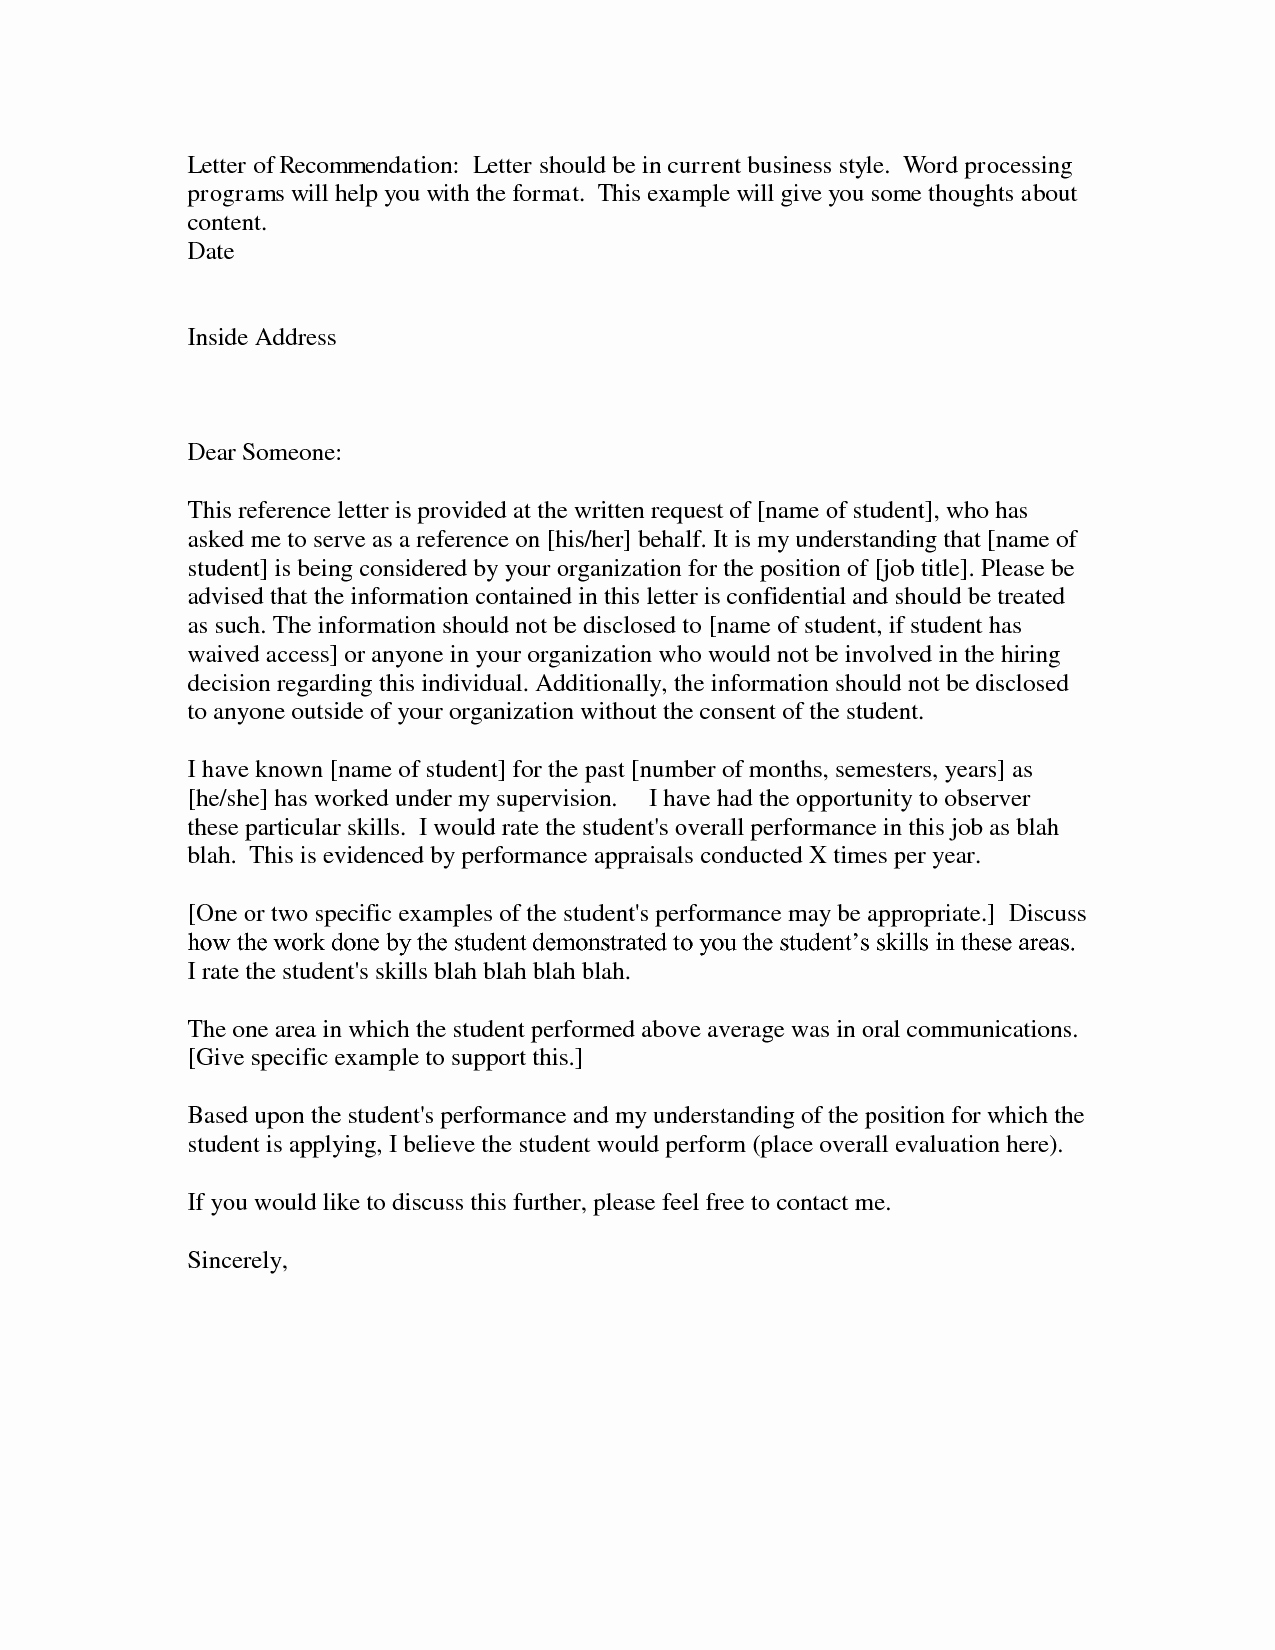 Letter Of Recommendation Request Example New Free Reference Letter Examplesexamples Of Reference